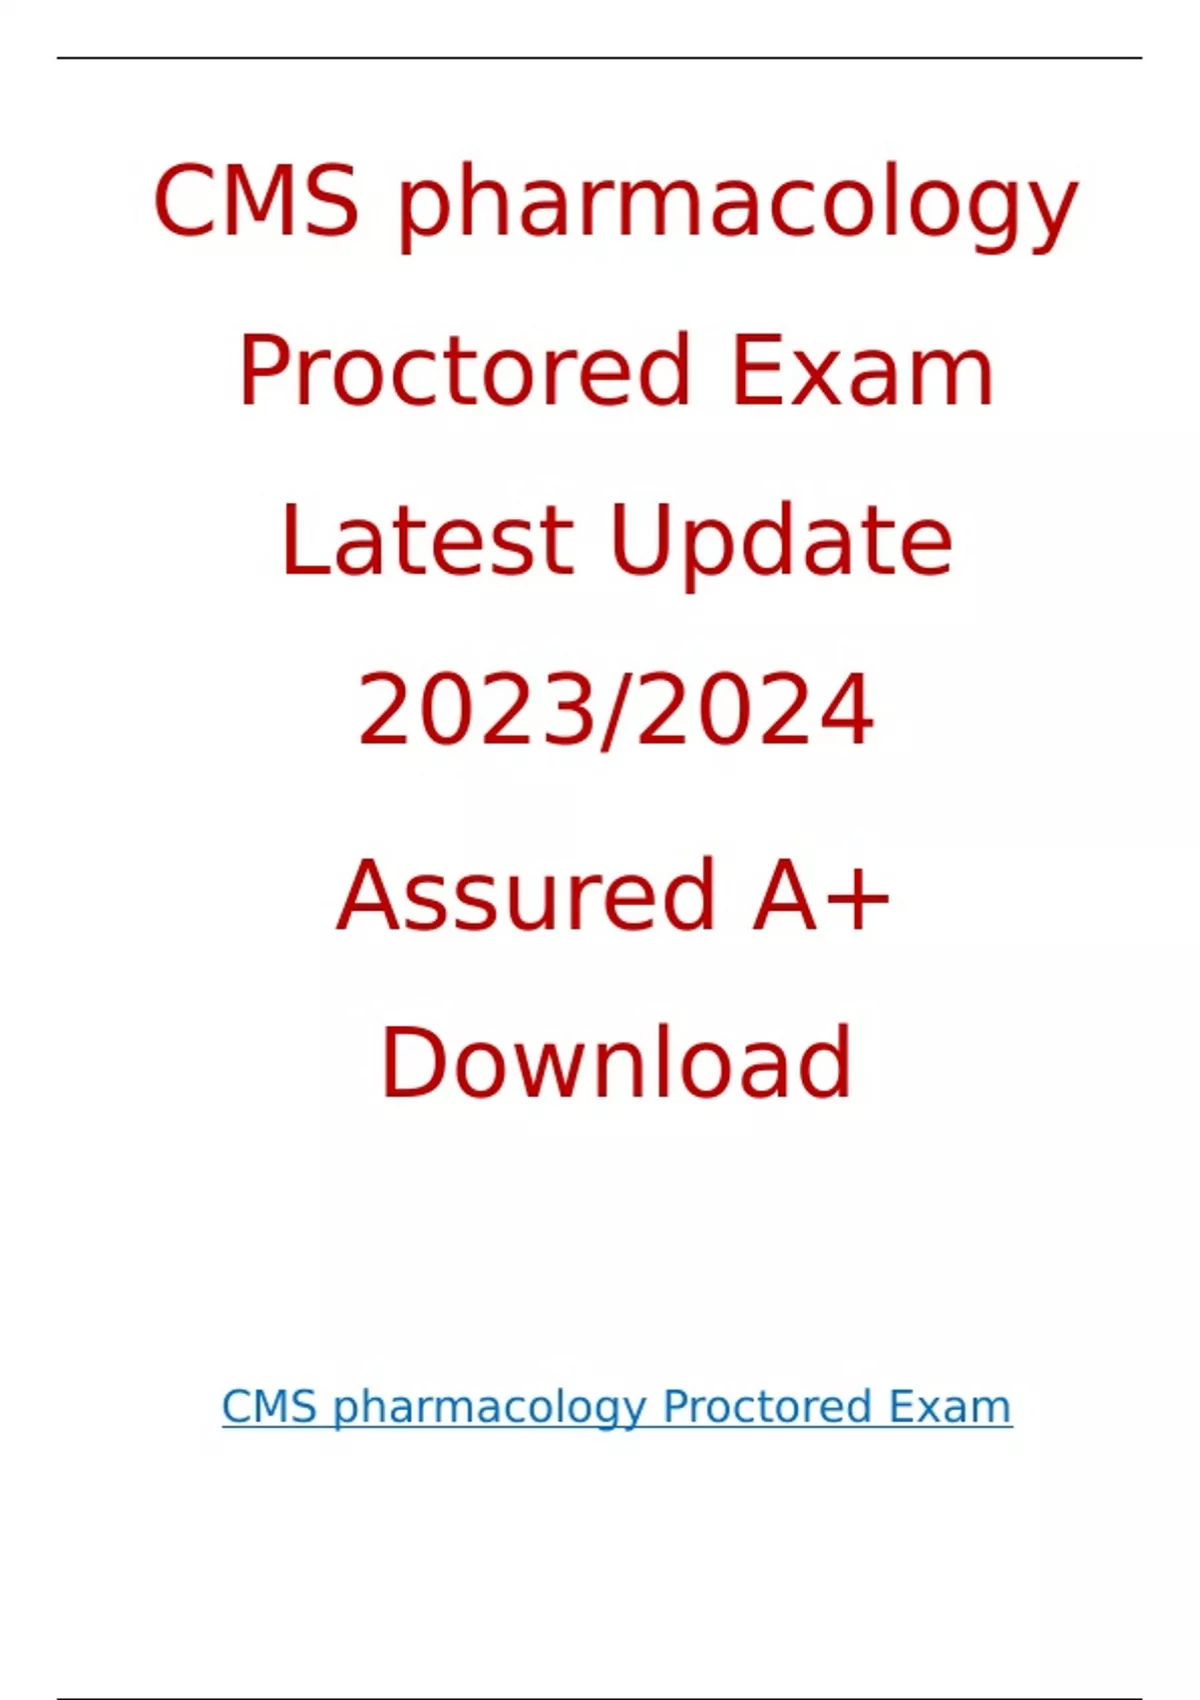 ATI CMS pharmacology Proctored Exam Latest Update 2023/2024 Assured A+